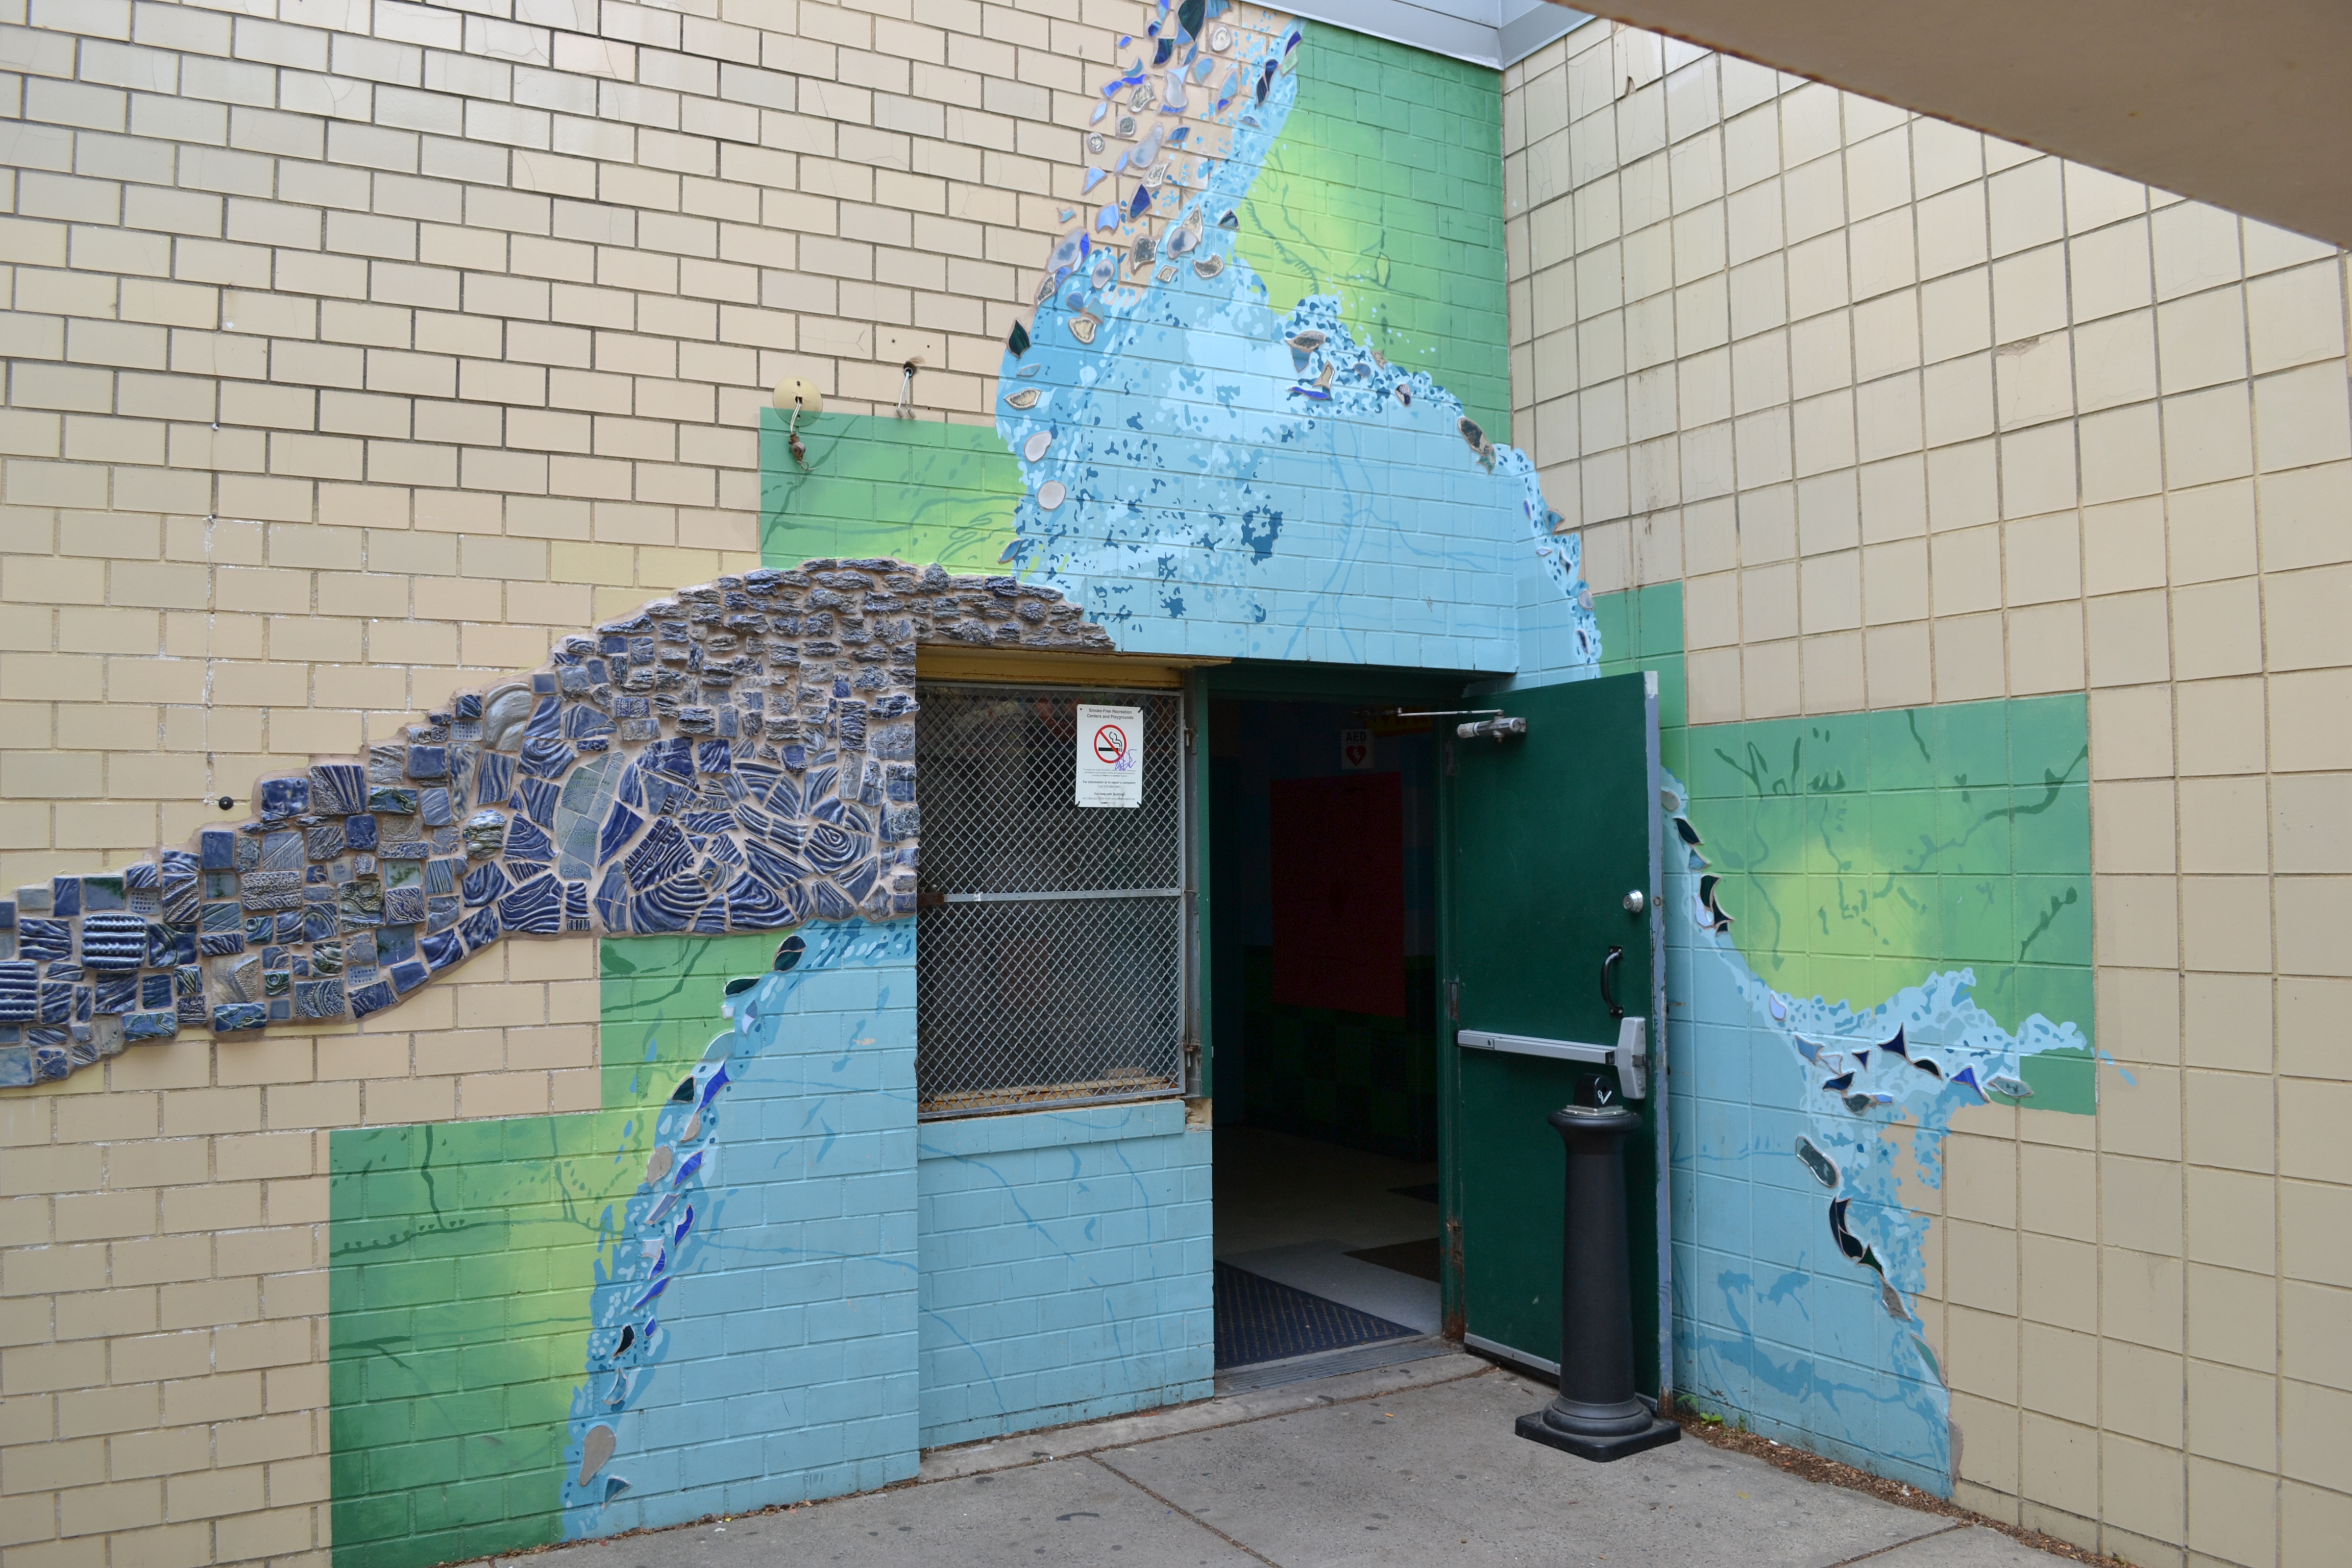 The Mural Arts initiative aims to connect the rec center to neighboring parks and the Delaware River